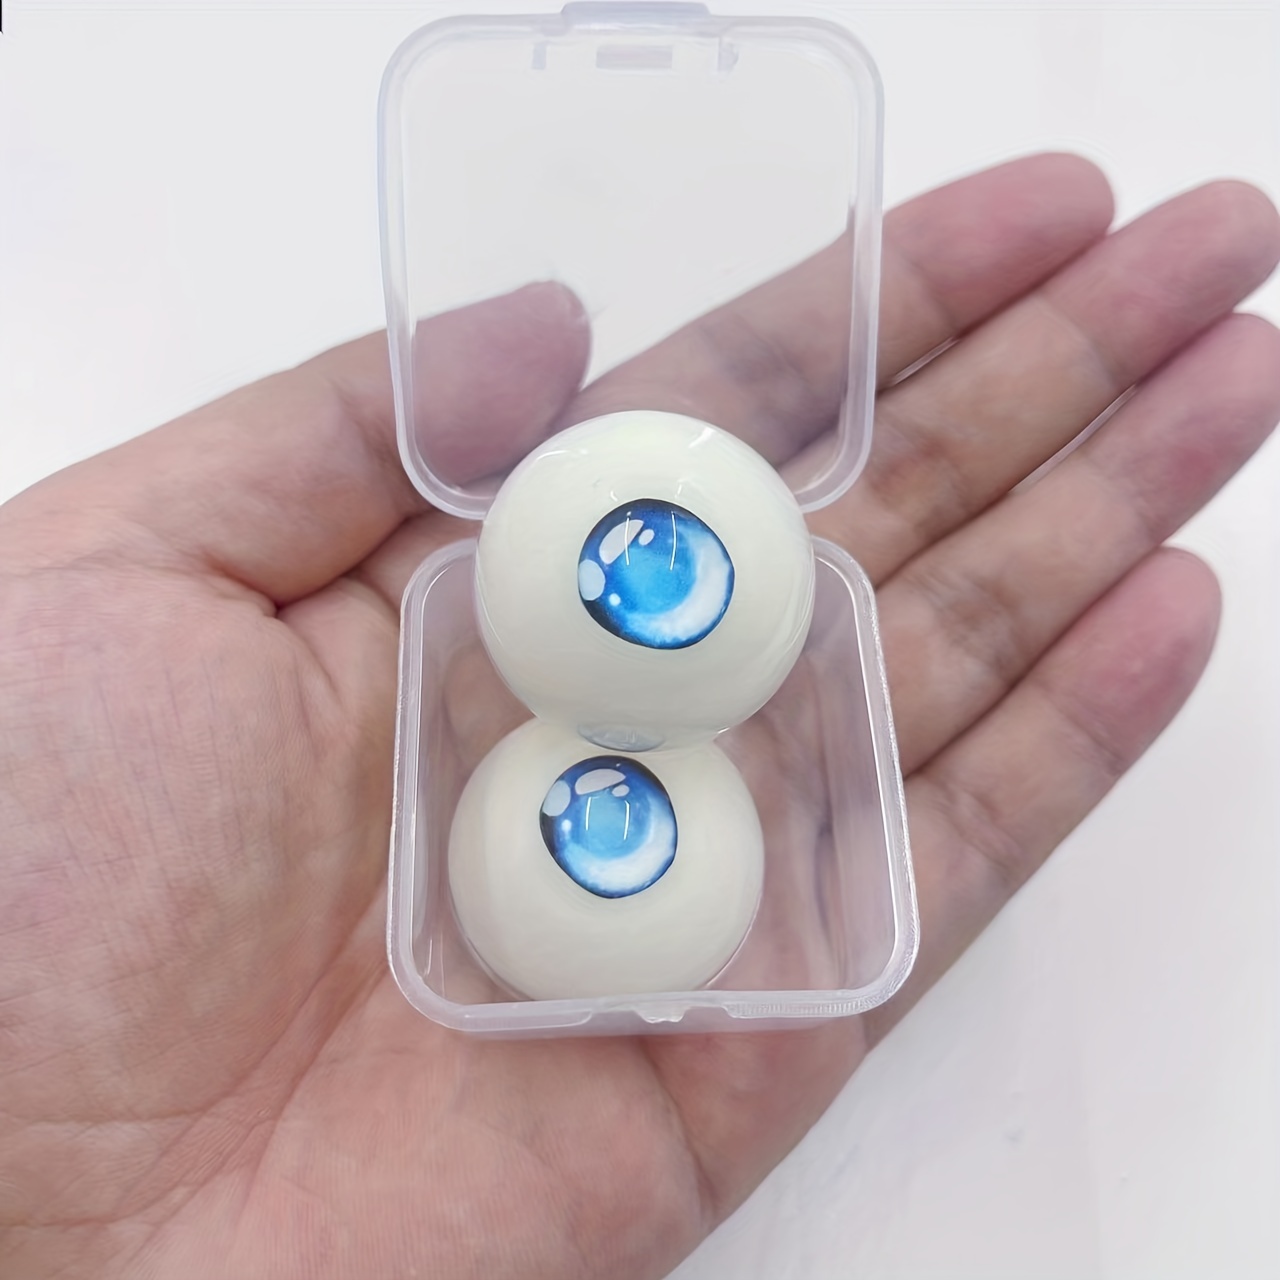 LIFANOU Realistic Fake Eyes 33mm - 1 Pair Doll Eyes Acrylic Half Round  Eyeballs for Halloween Props, Dolls Crafts, Cosplay and Party Decorations